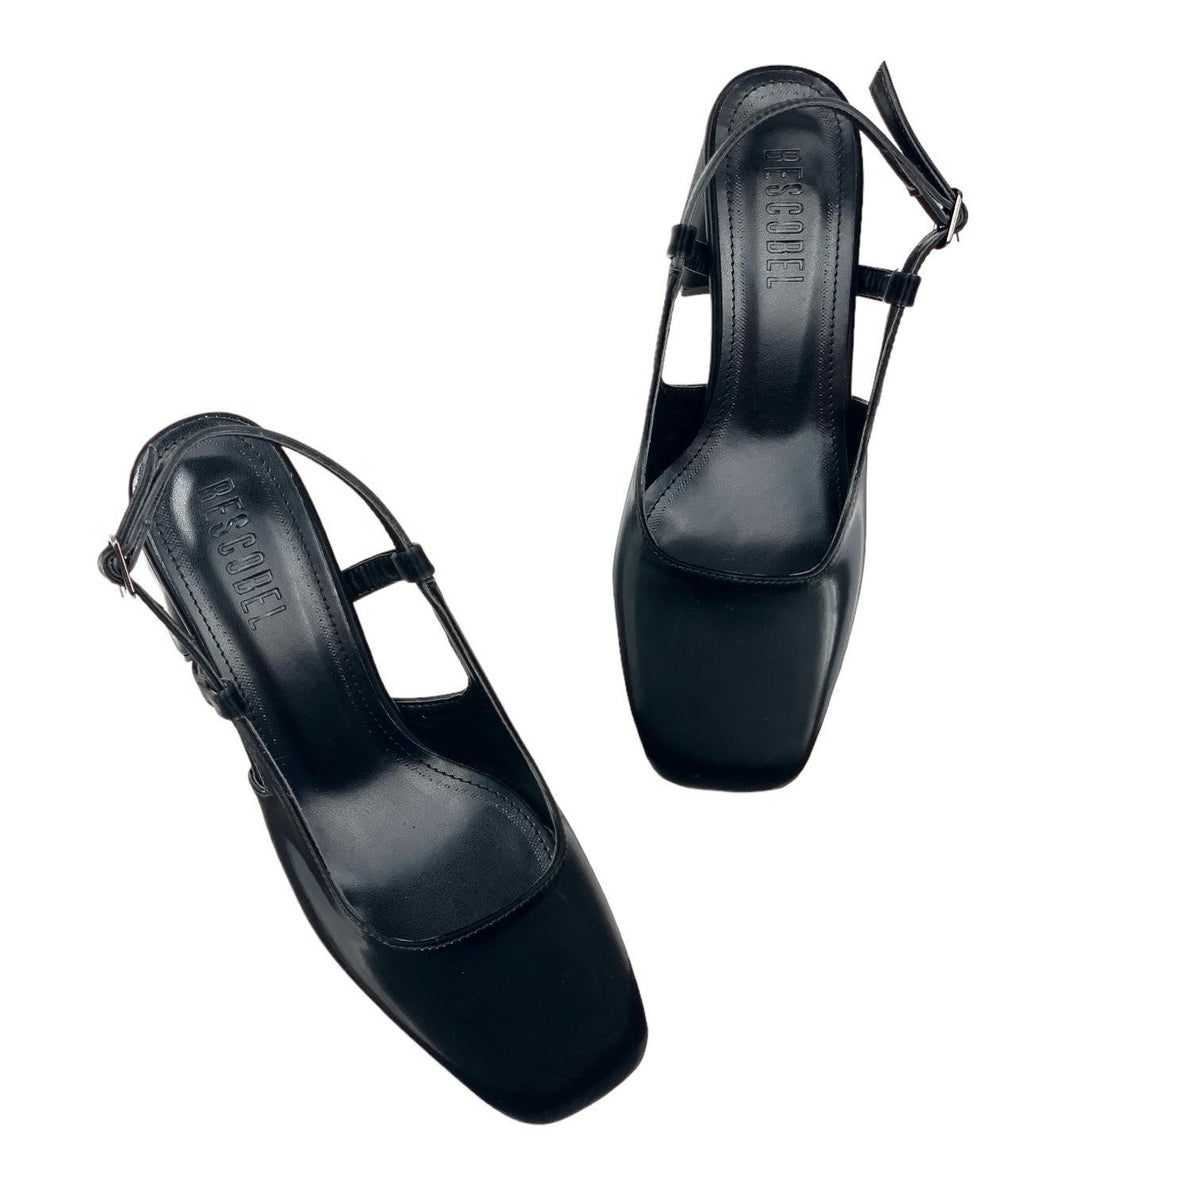 Women's Collar Black Silky Material Round Toe Open Back Sandals 8 Cm - STREETMODE ™